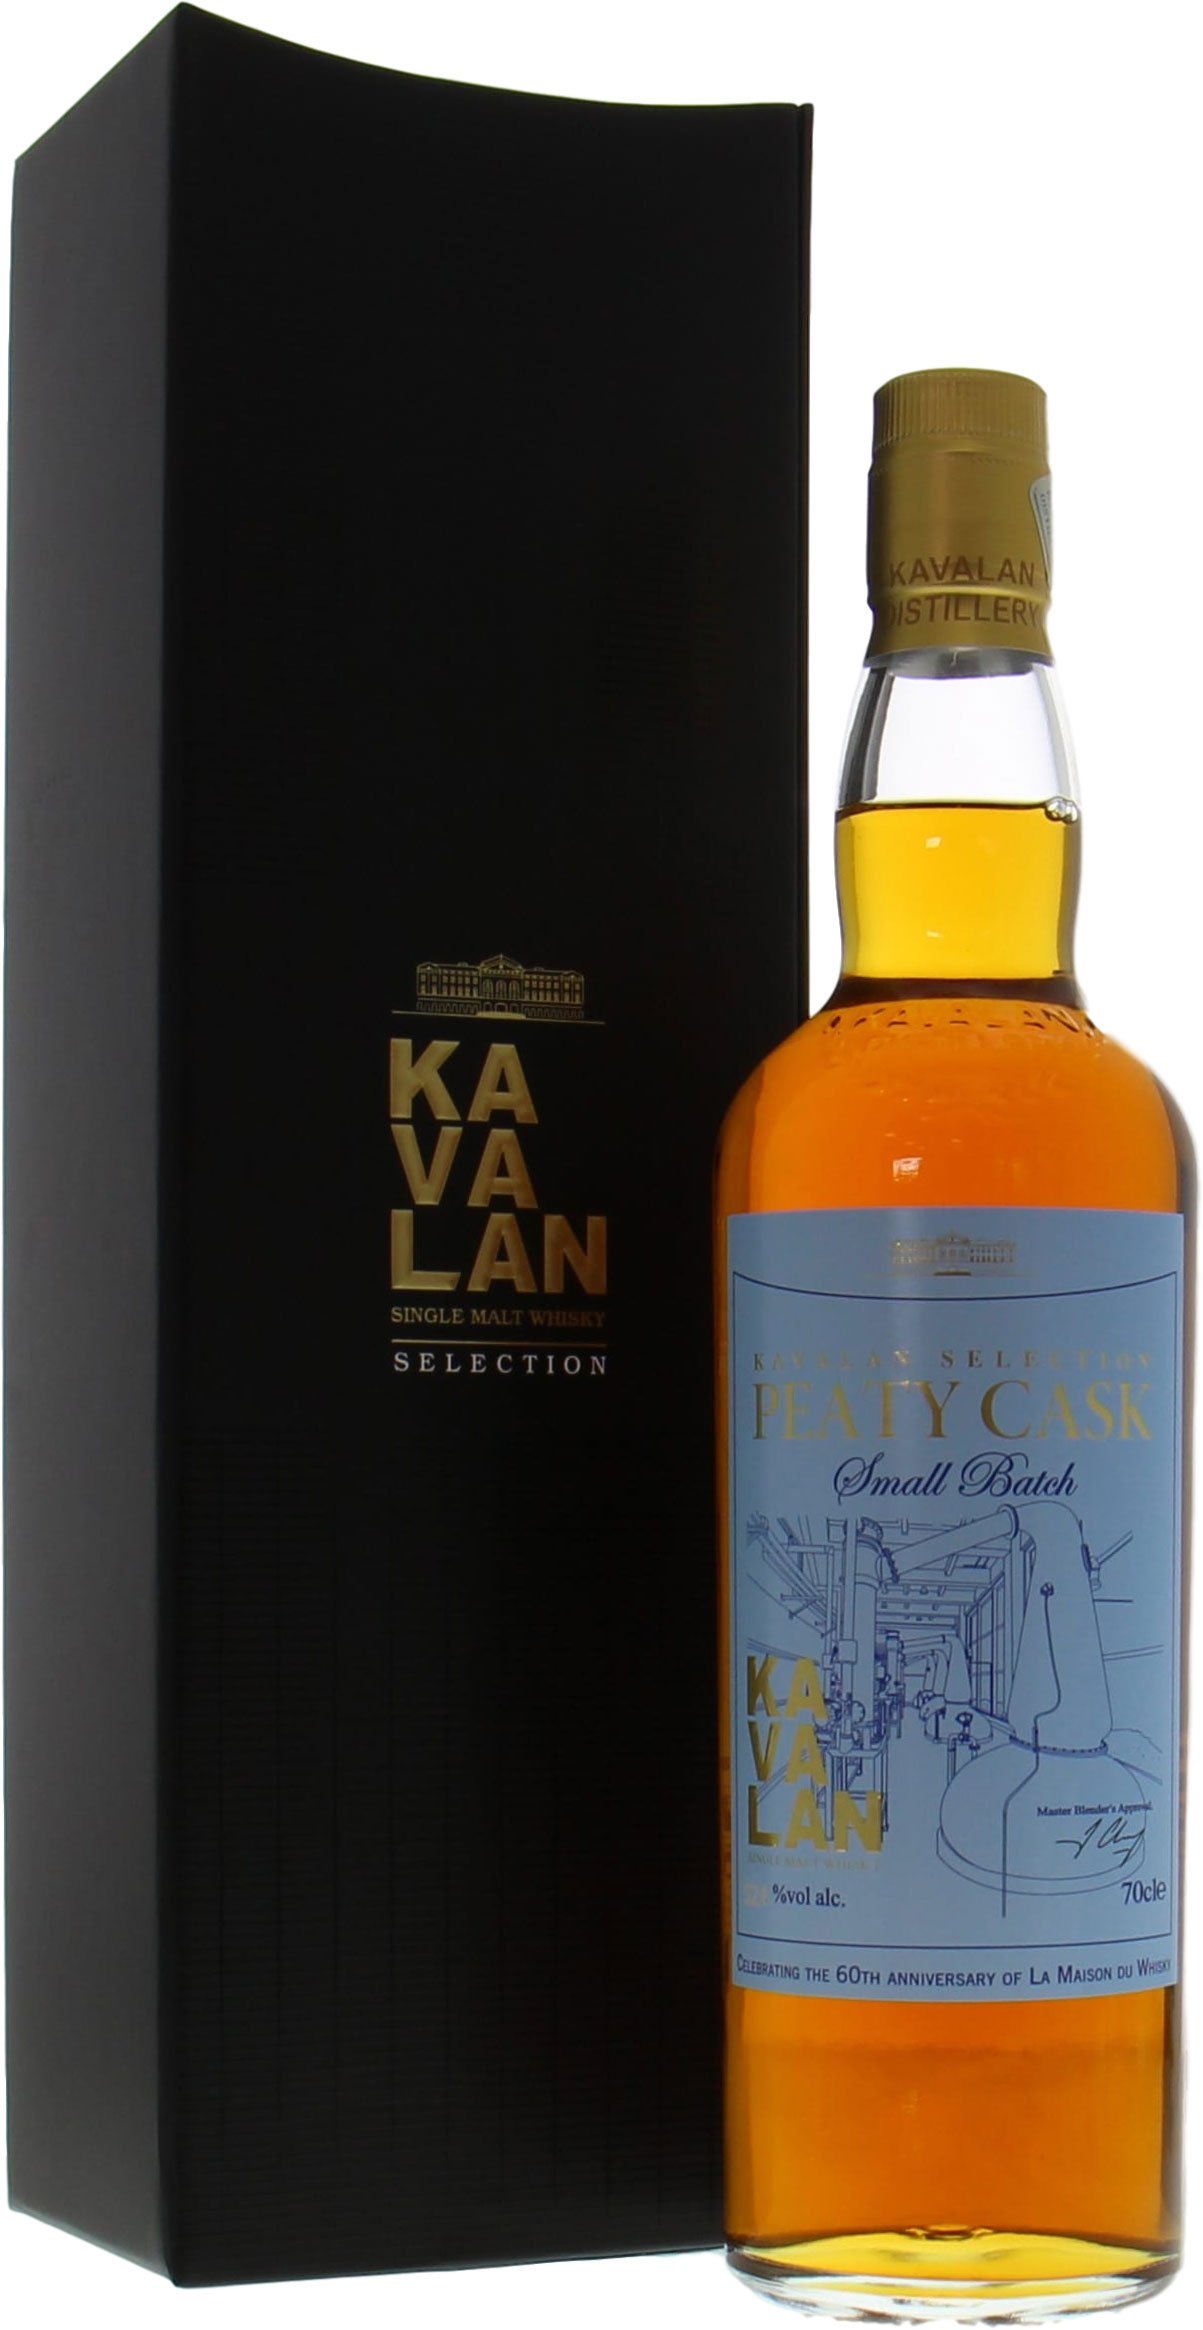 Kavalan - Peaty Cask 60th Anniversary of La Maison du Whisky 52.4% NV In Original Container